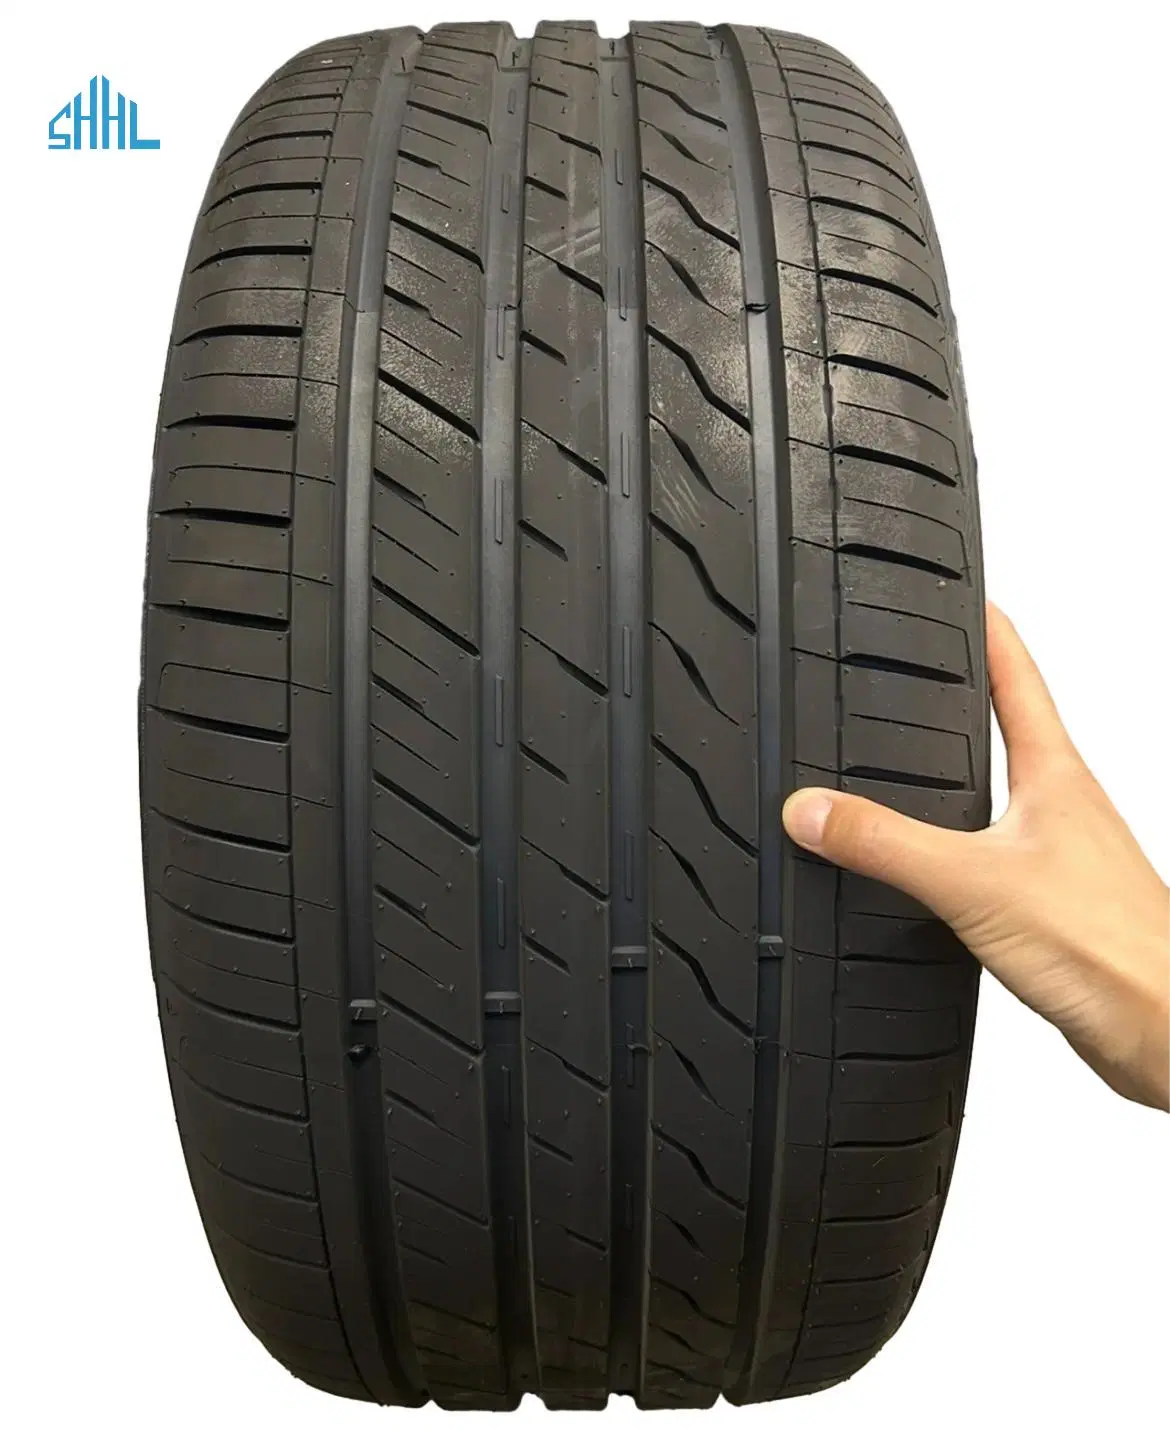 Transverse Pattern/All Weather Pattern at Ht Mt Tire 225/60r18 225/65r17 SUV Passenger Car Tires Commercial Light Truck Tires High Performance